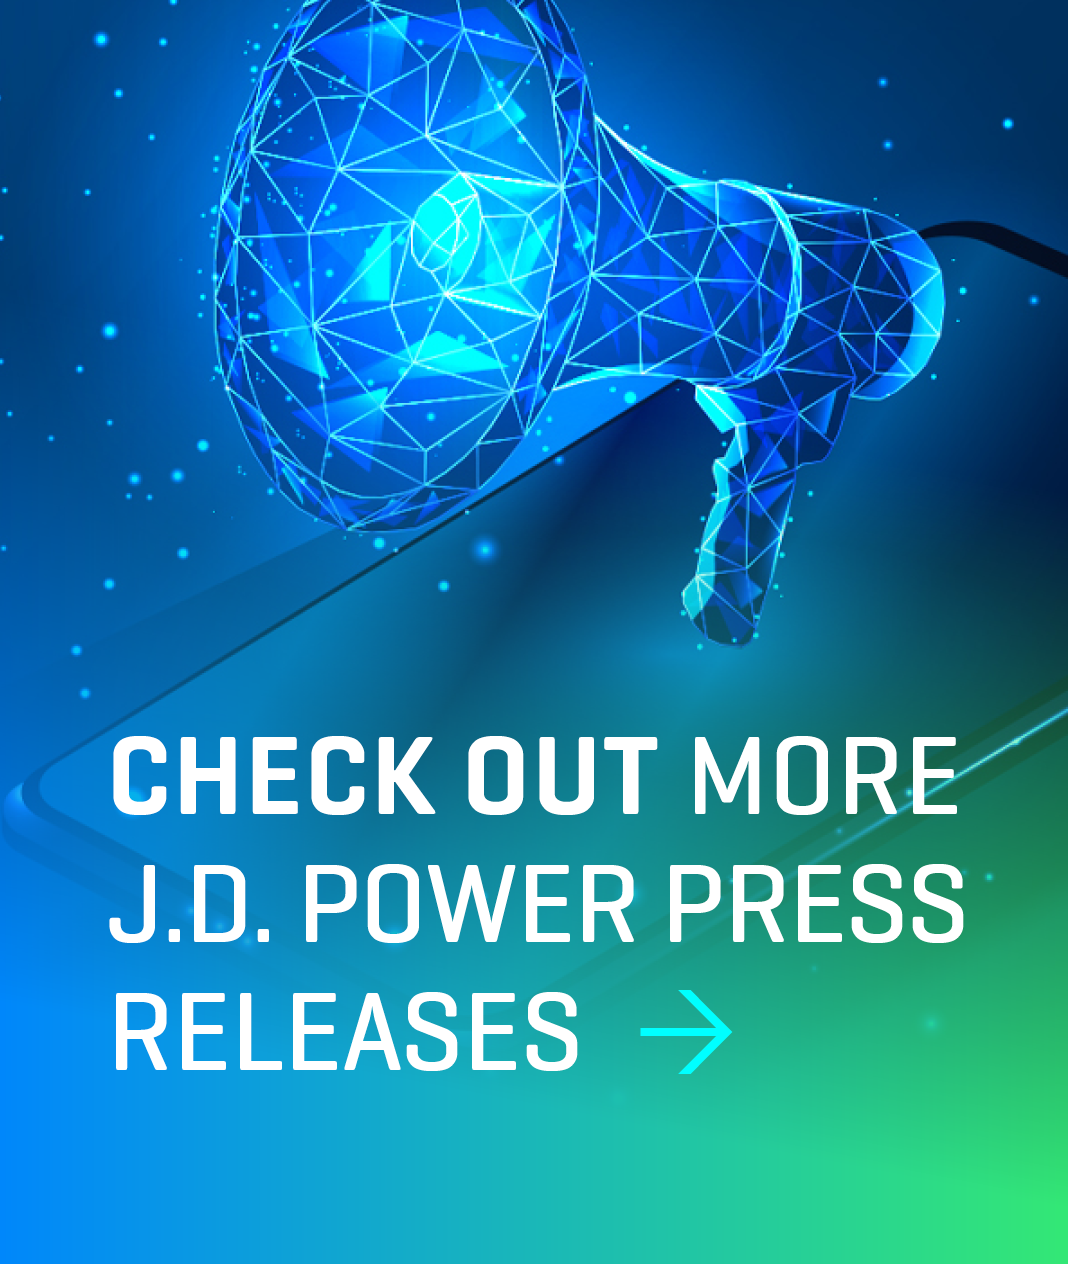 Check out more press releases from J.D. Power